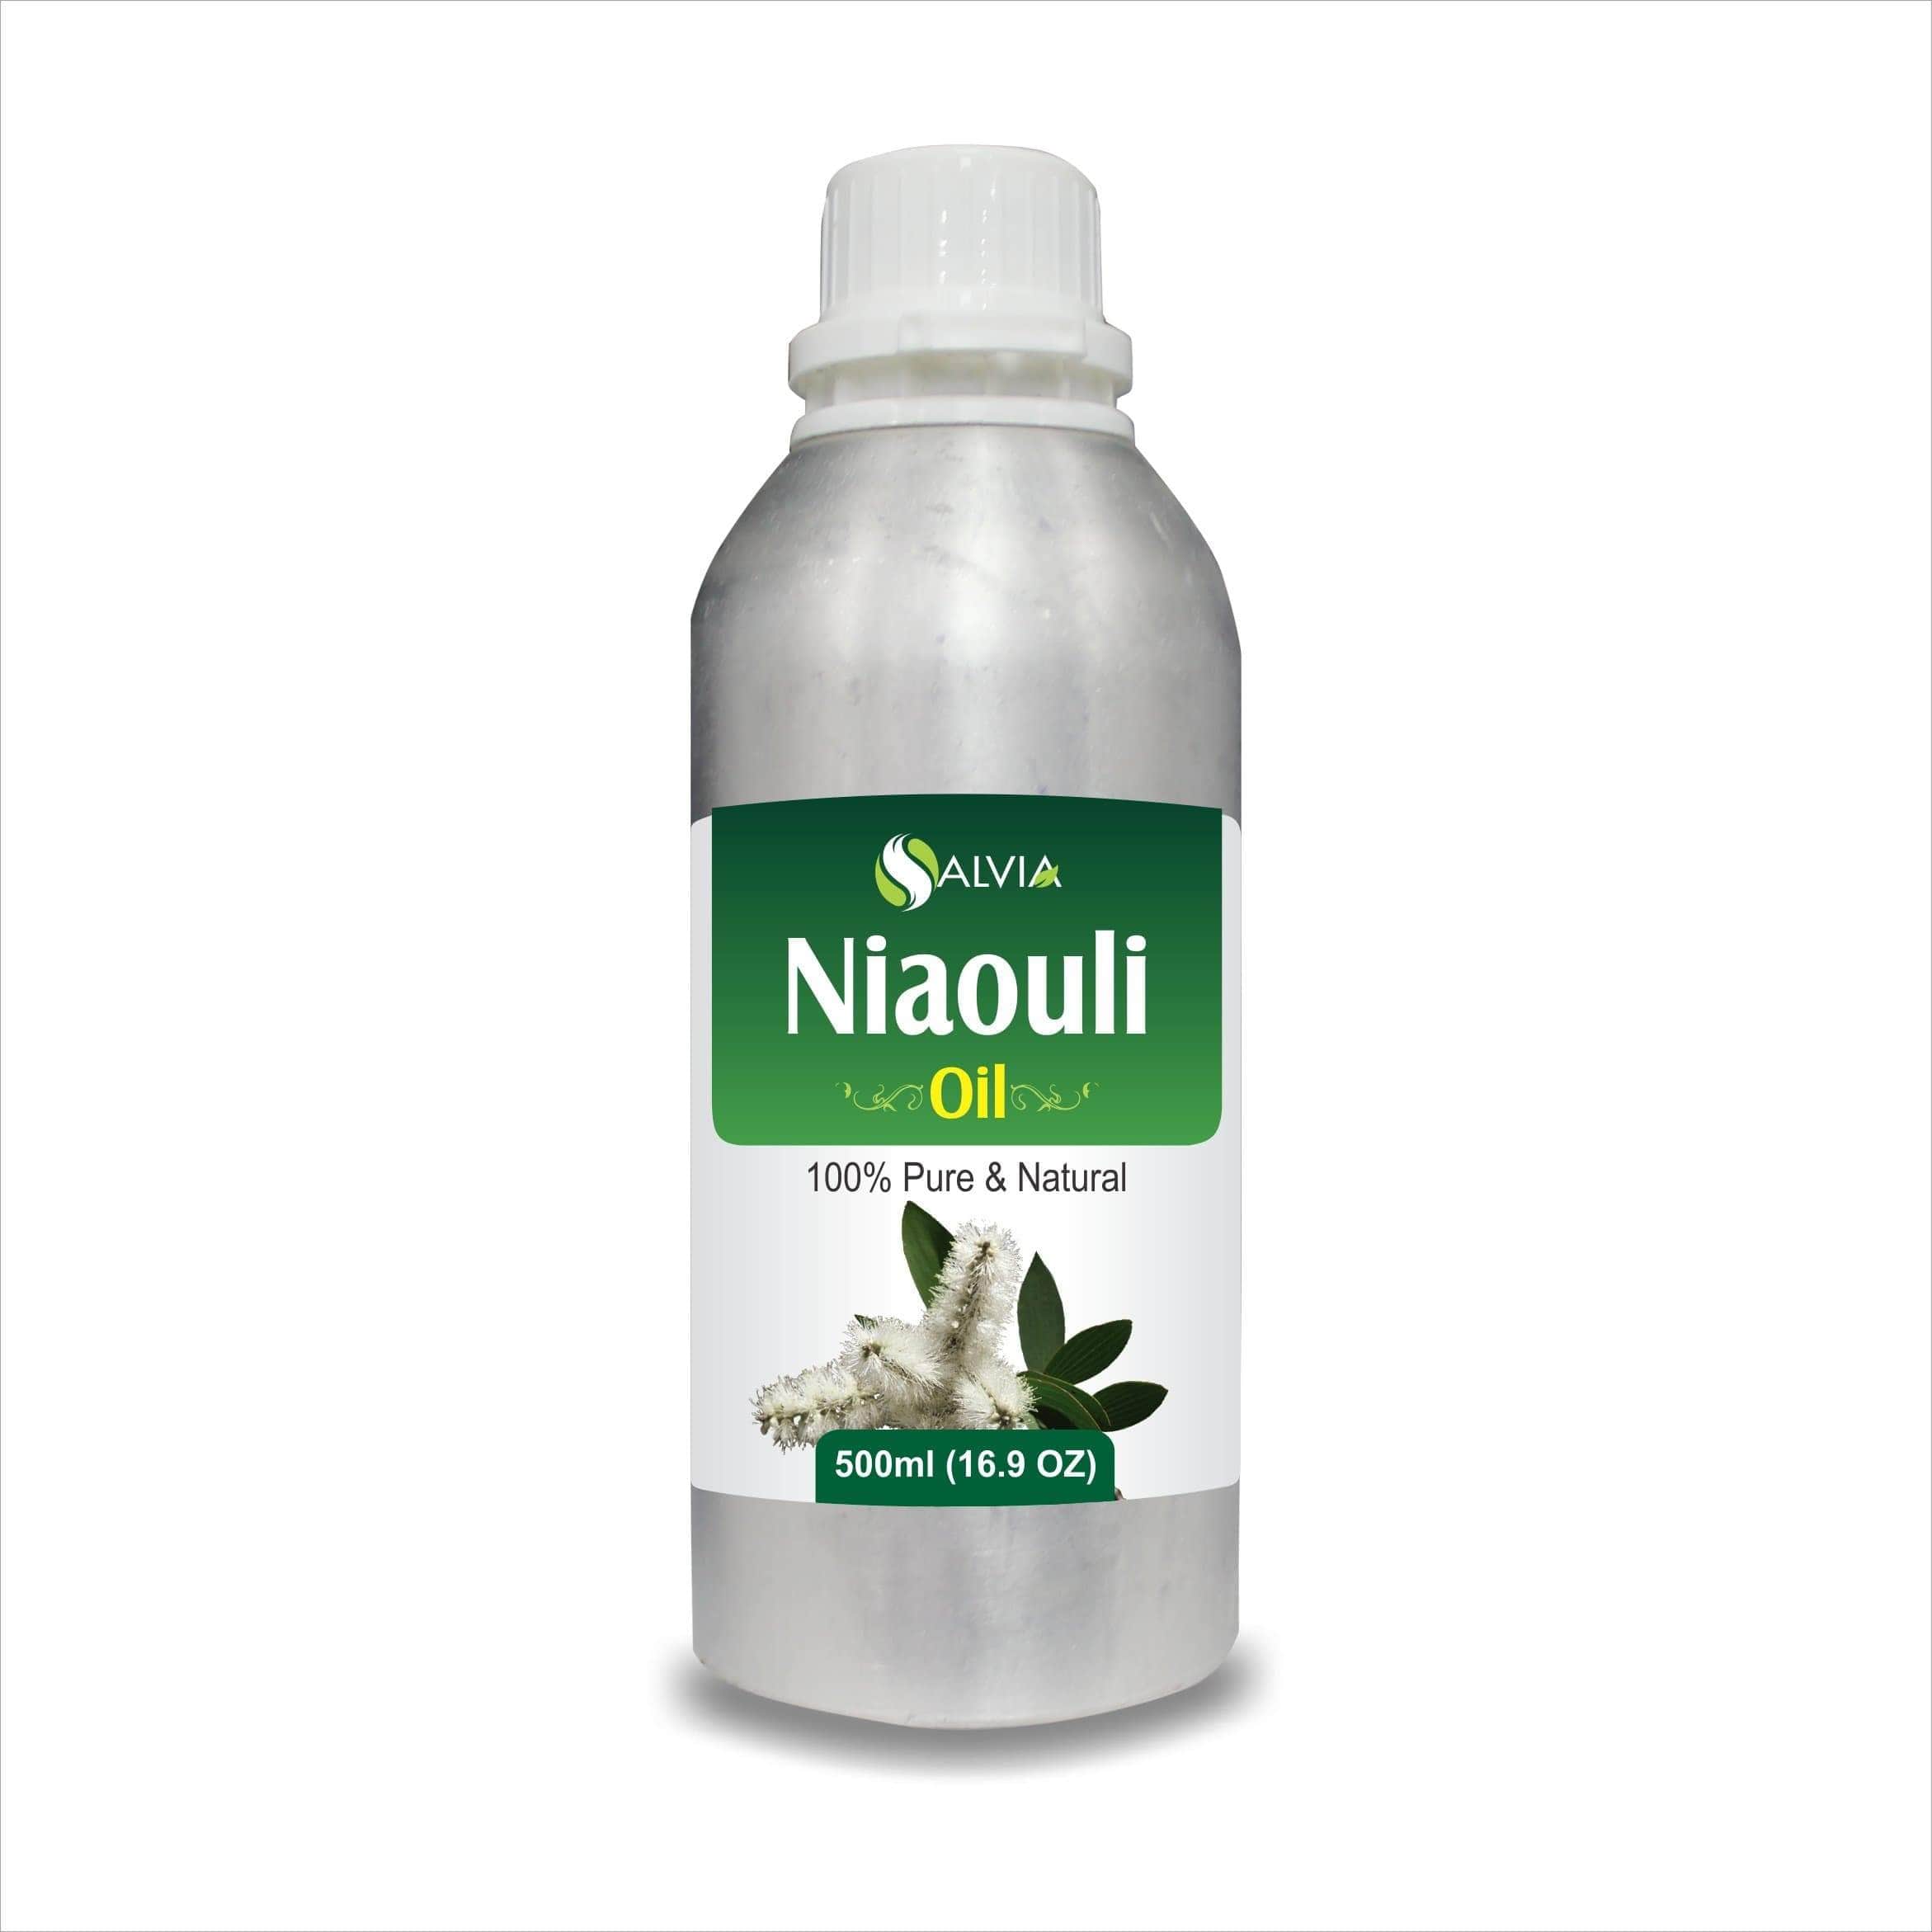 niaouli oil for hair